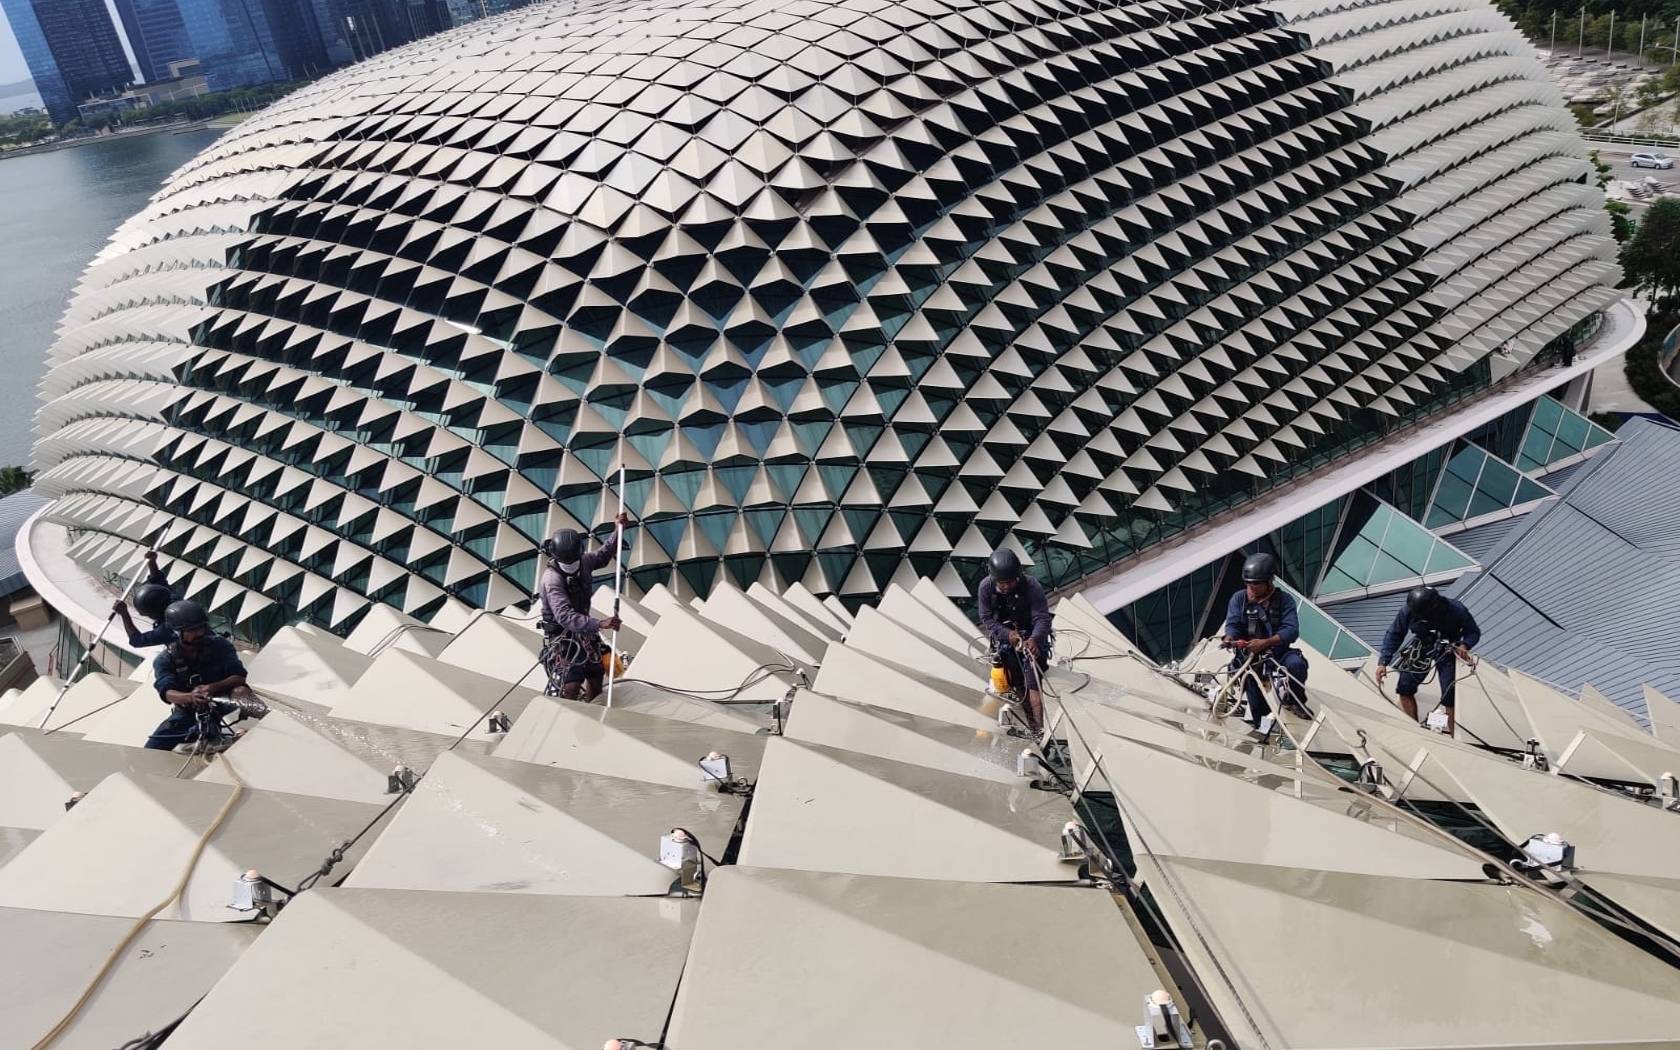 Image of Rope Access Technicians cleaning the cladding on the roof of Esplanade's structure.